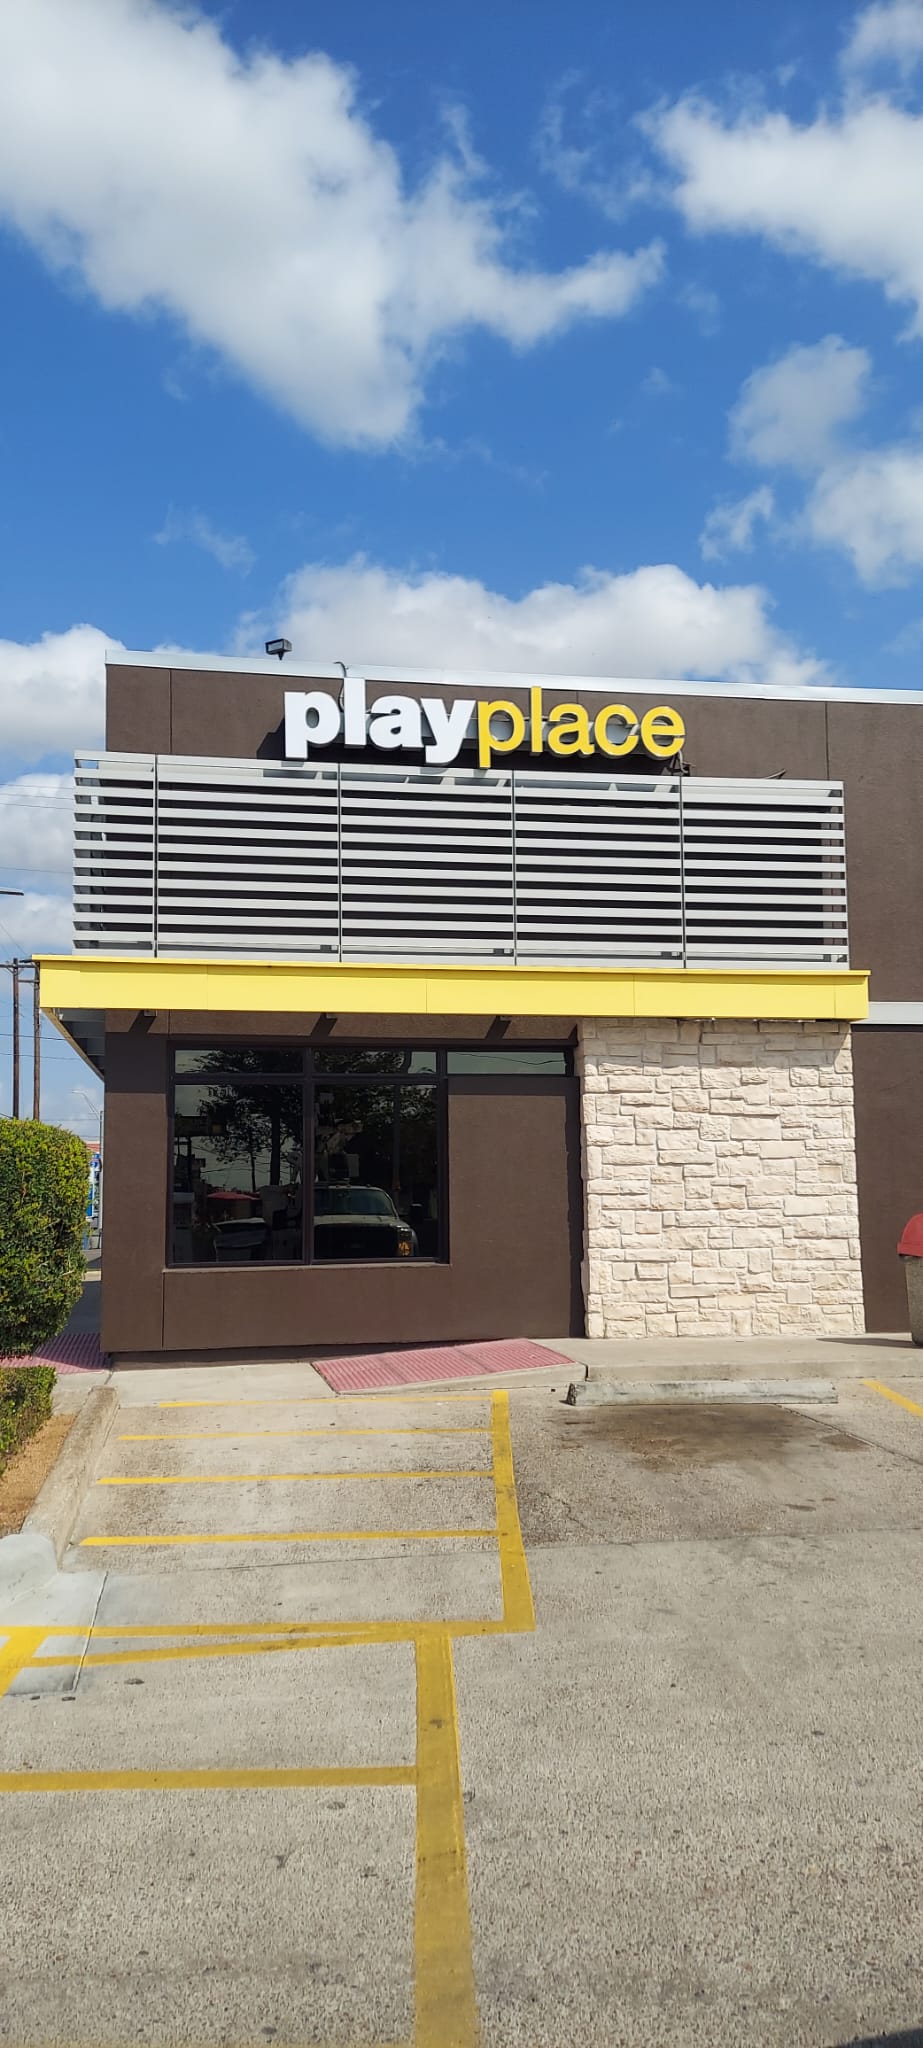 Brightened McDonald's Playplace with a new eye-catching sign for the Donna location, highlighting family-friendly fun.